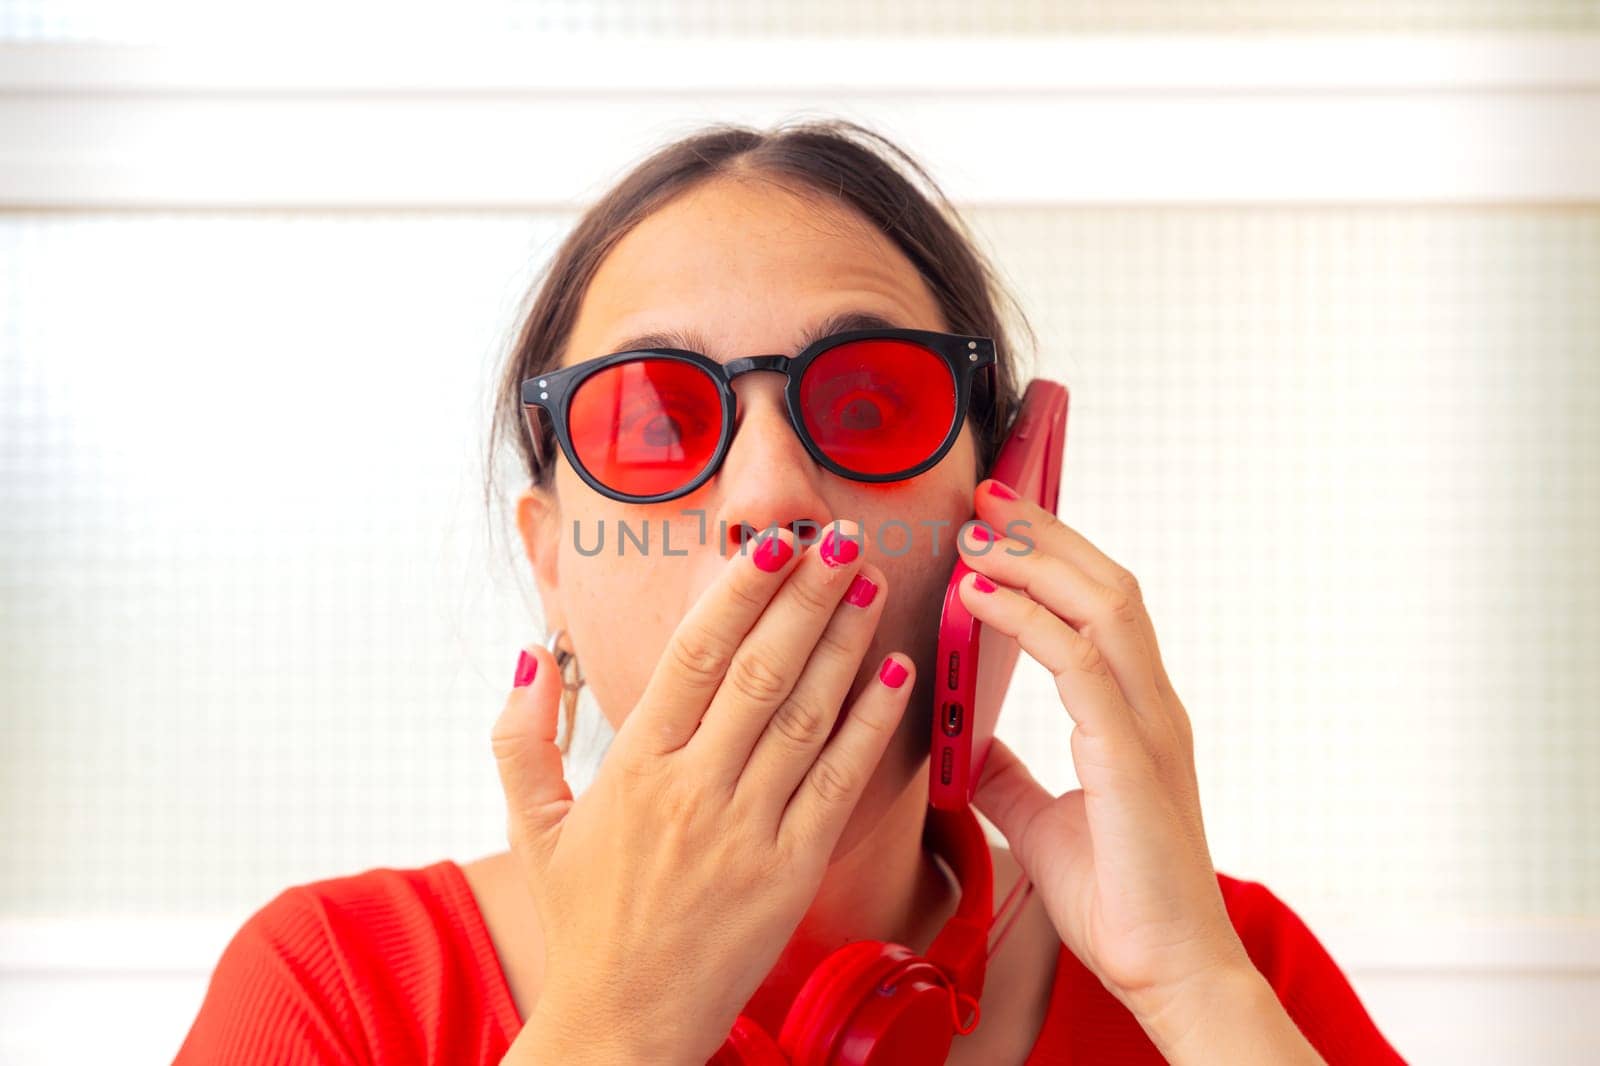 Young woman wearing sunglasses and red dress covering her mouth with her hand when talking on the phone with a friend and laughing